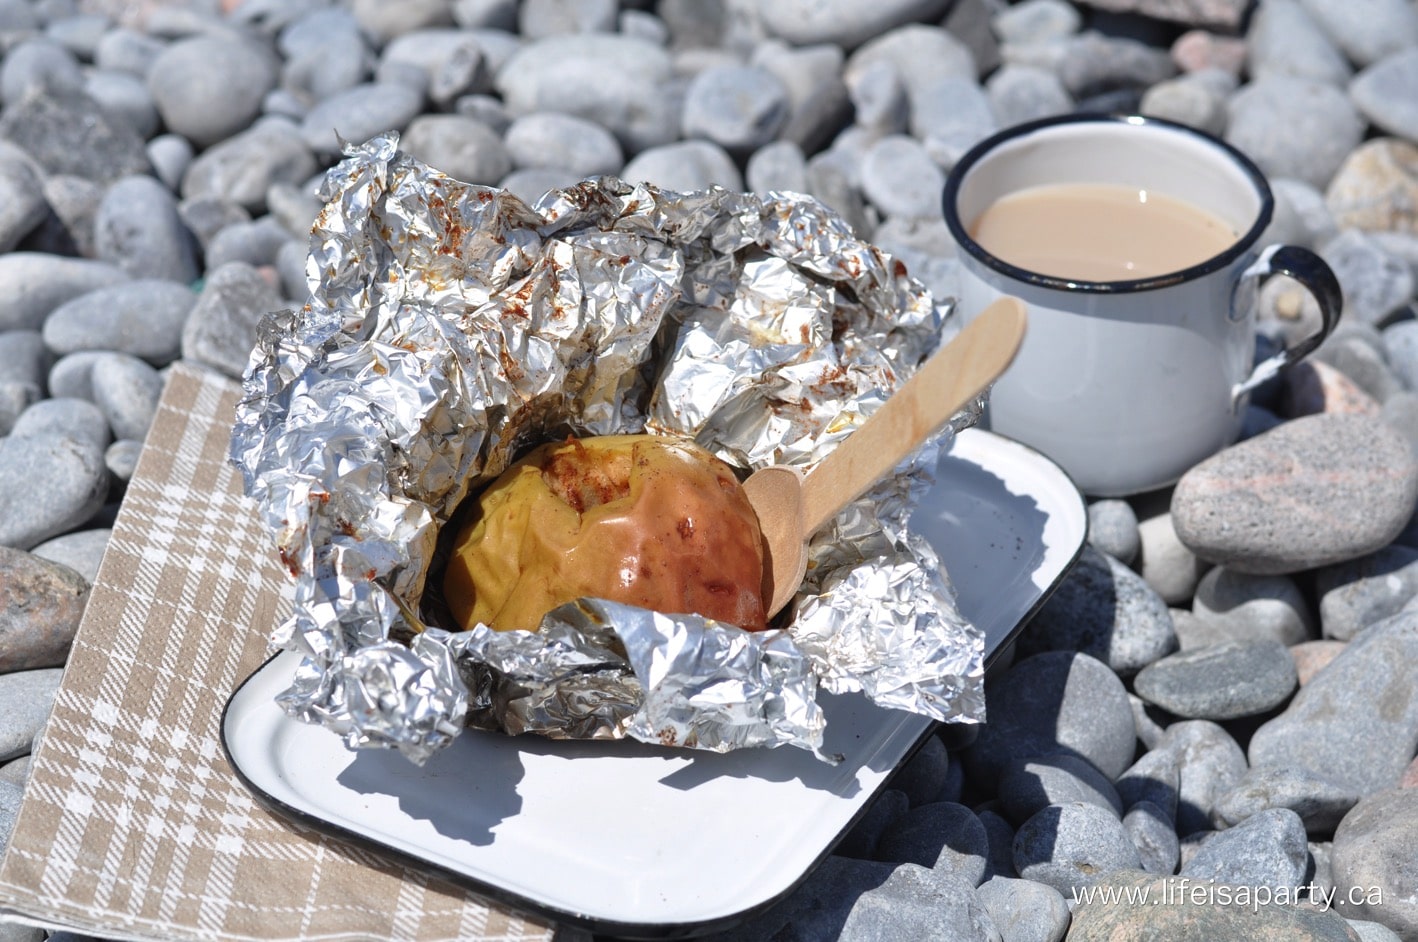 Campfire Baked Apples on the beach